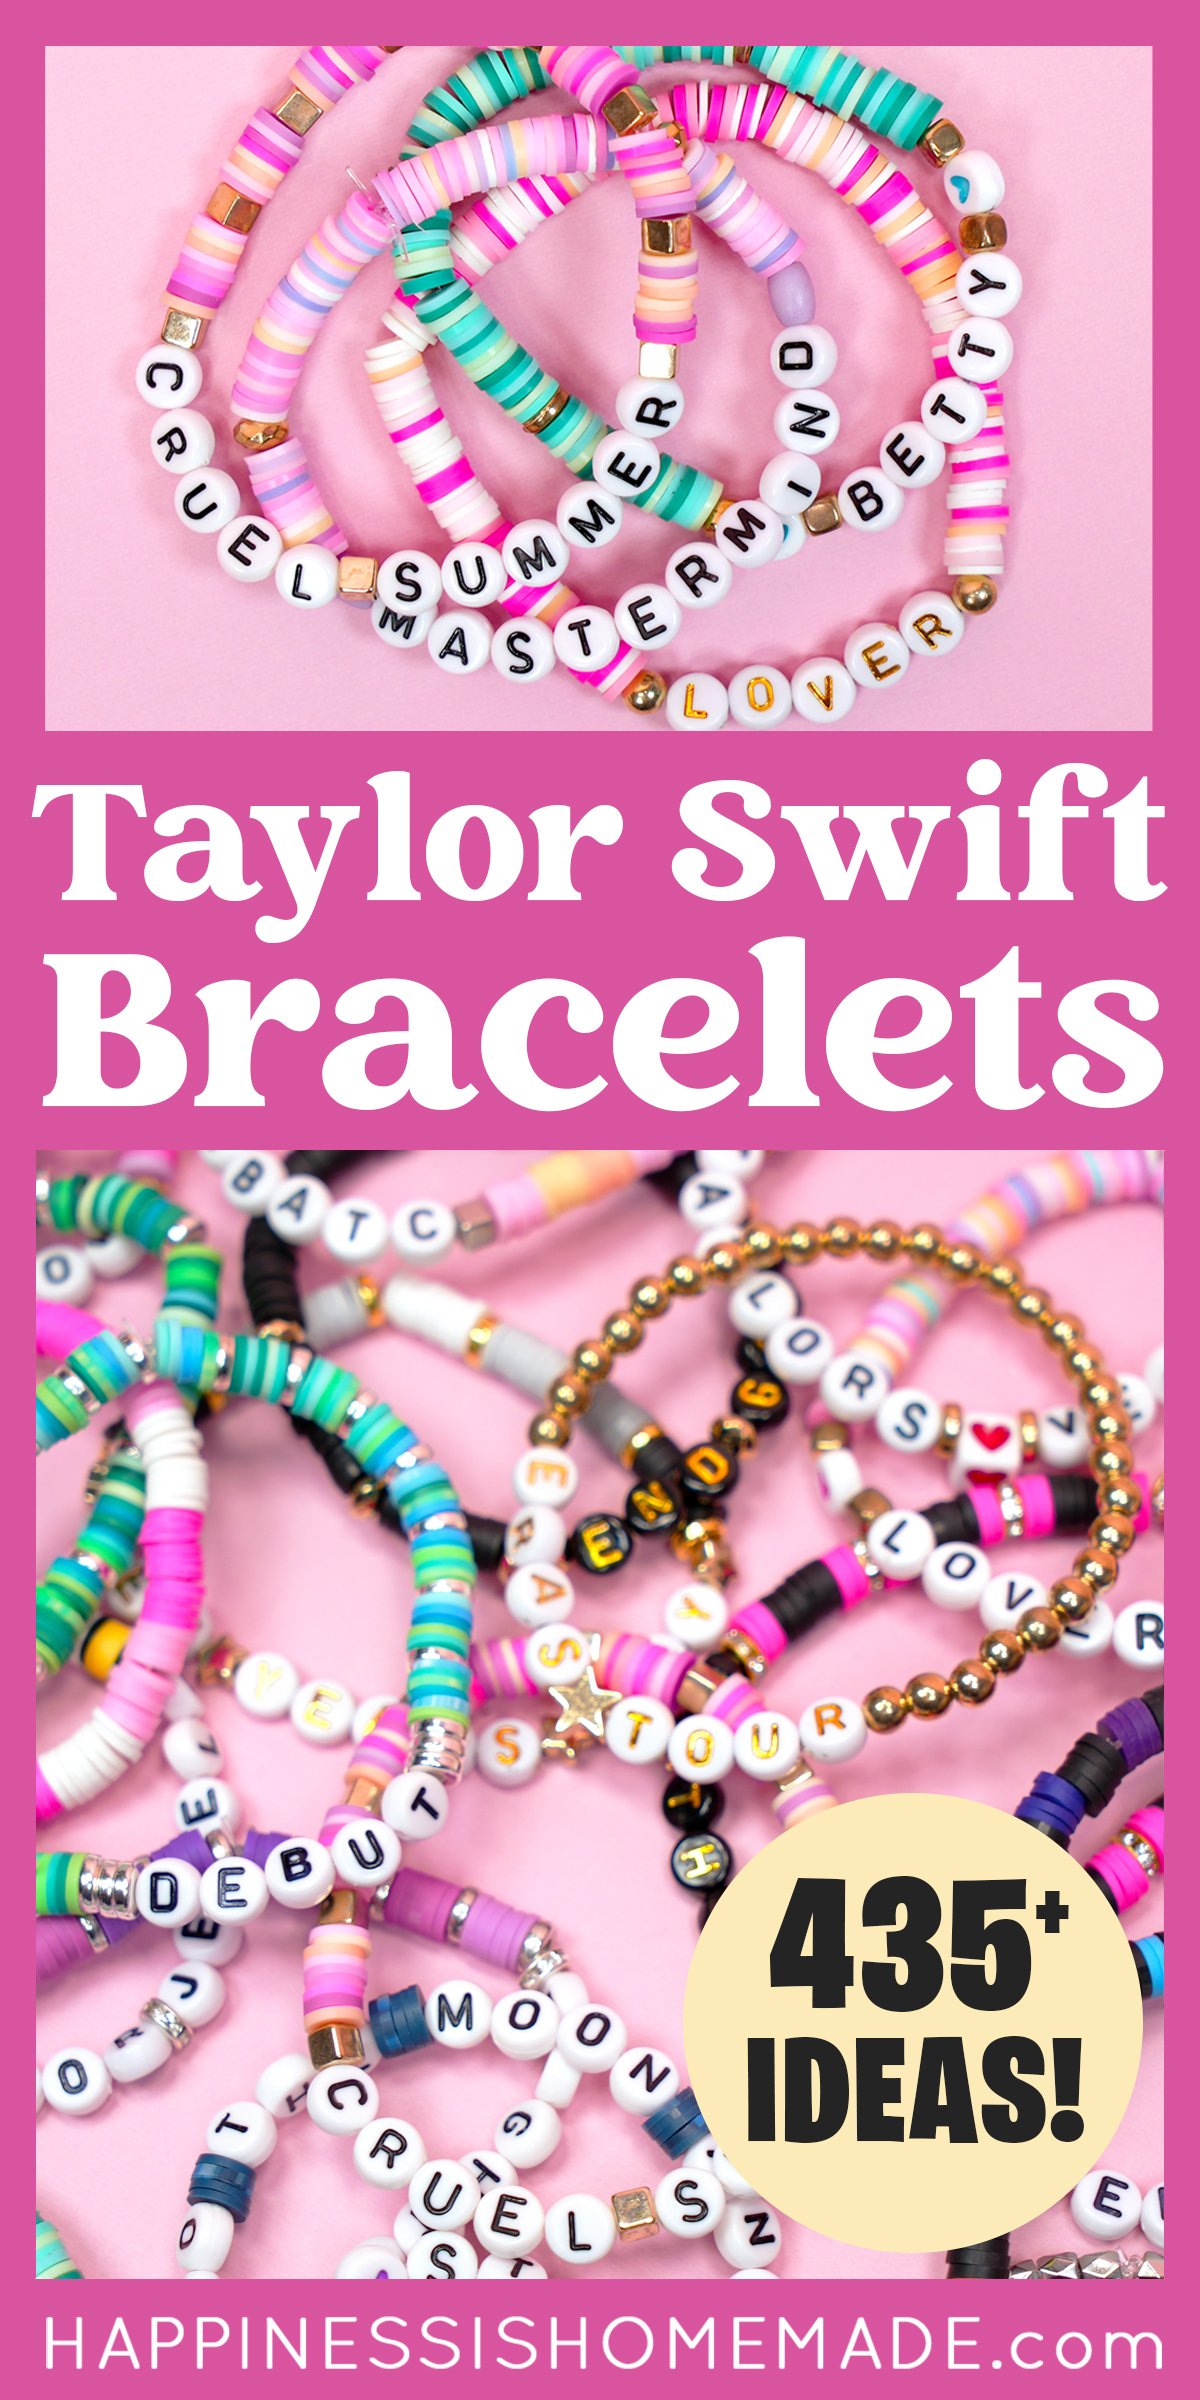 Pinterest graphic: "Taylor Swift Bracelets: 435+ Ideas" with collage of bracelet examples